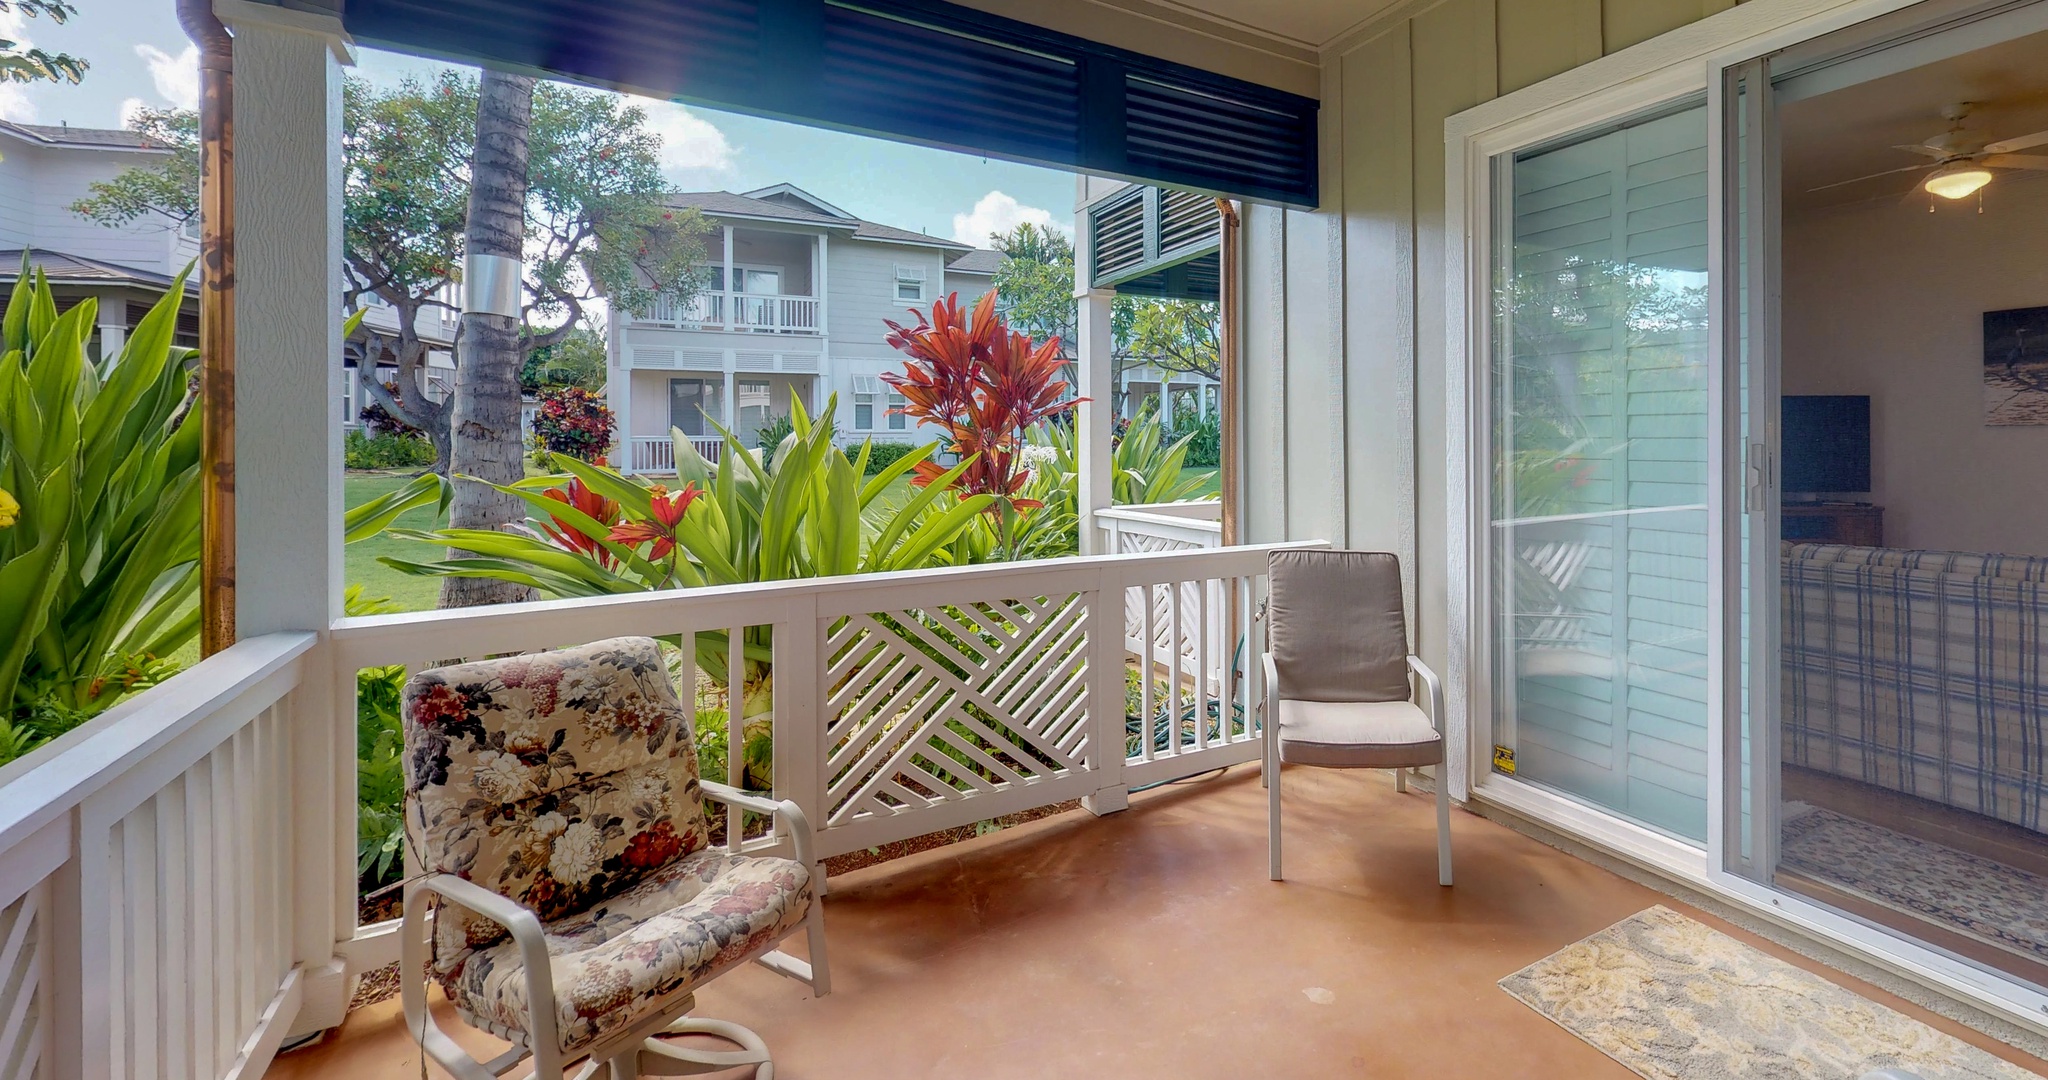 Kapolei Vacation Rentals, Coconut Plantation 1158-1 - A peaceful day on the lanai.